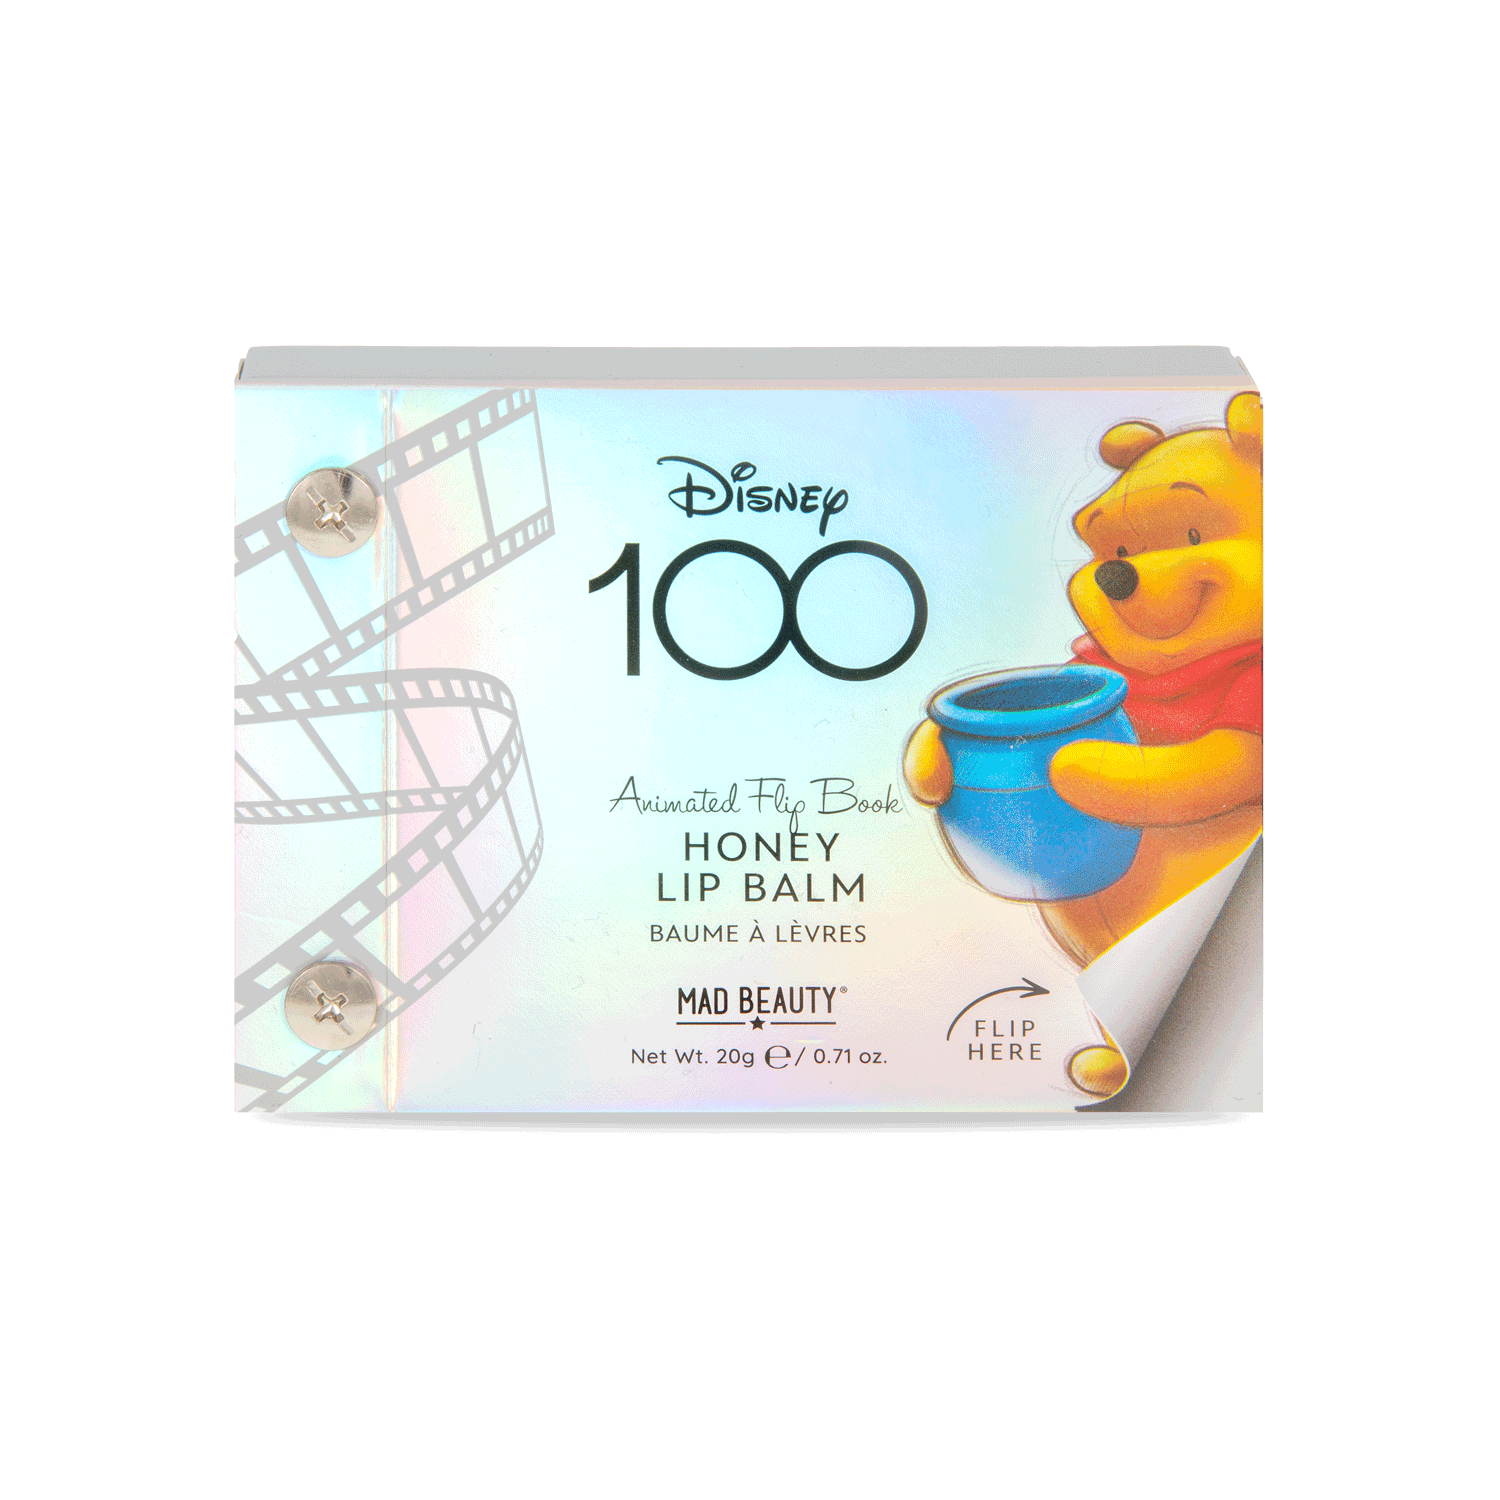 Shop Disney 100 Winnie the Pooh Lip Balm - Premium Lip Balm from Mad Beauty Online now at Spoiled Brat 